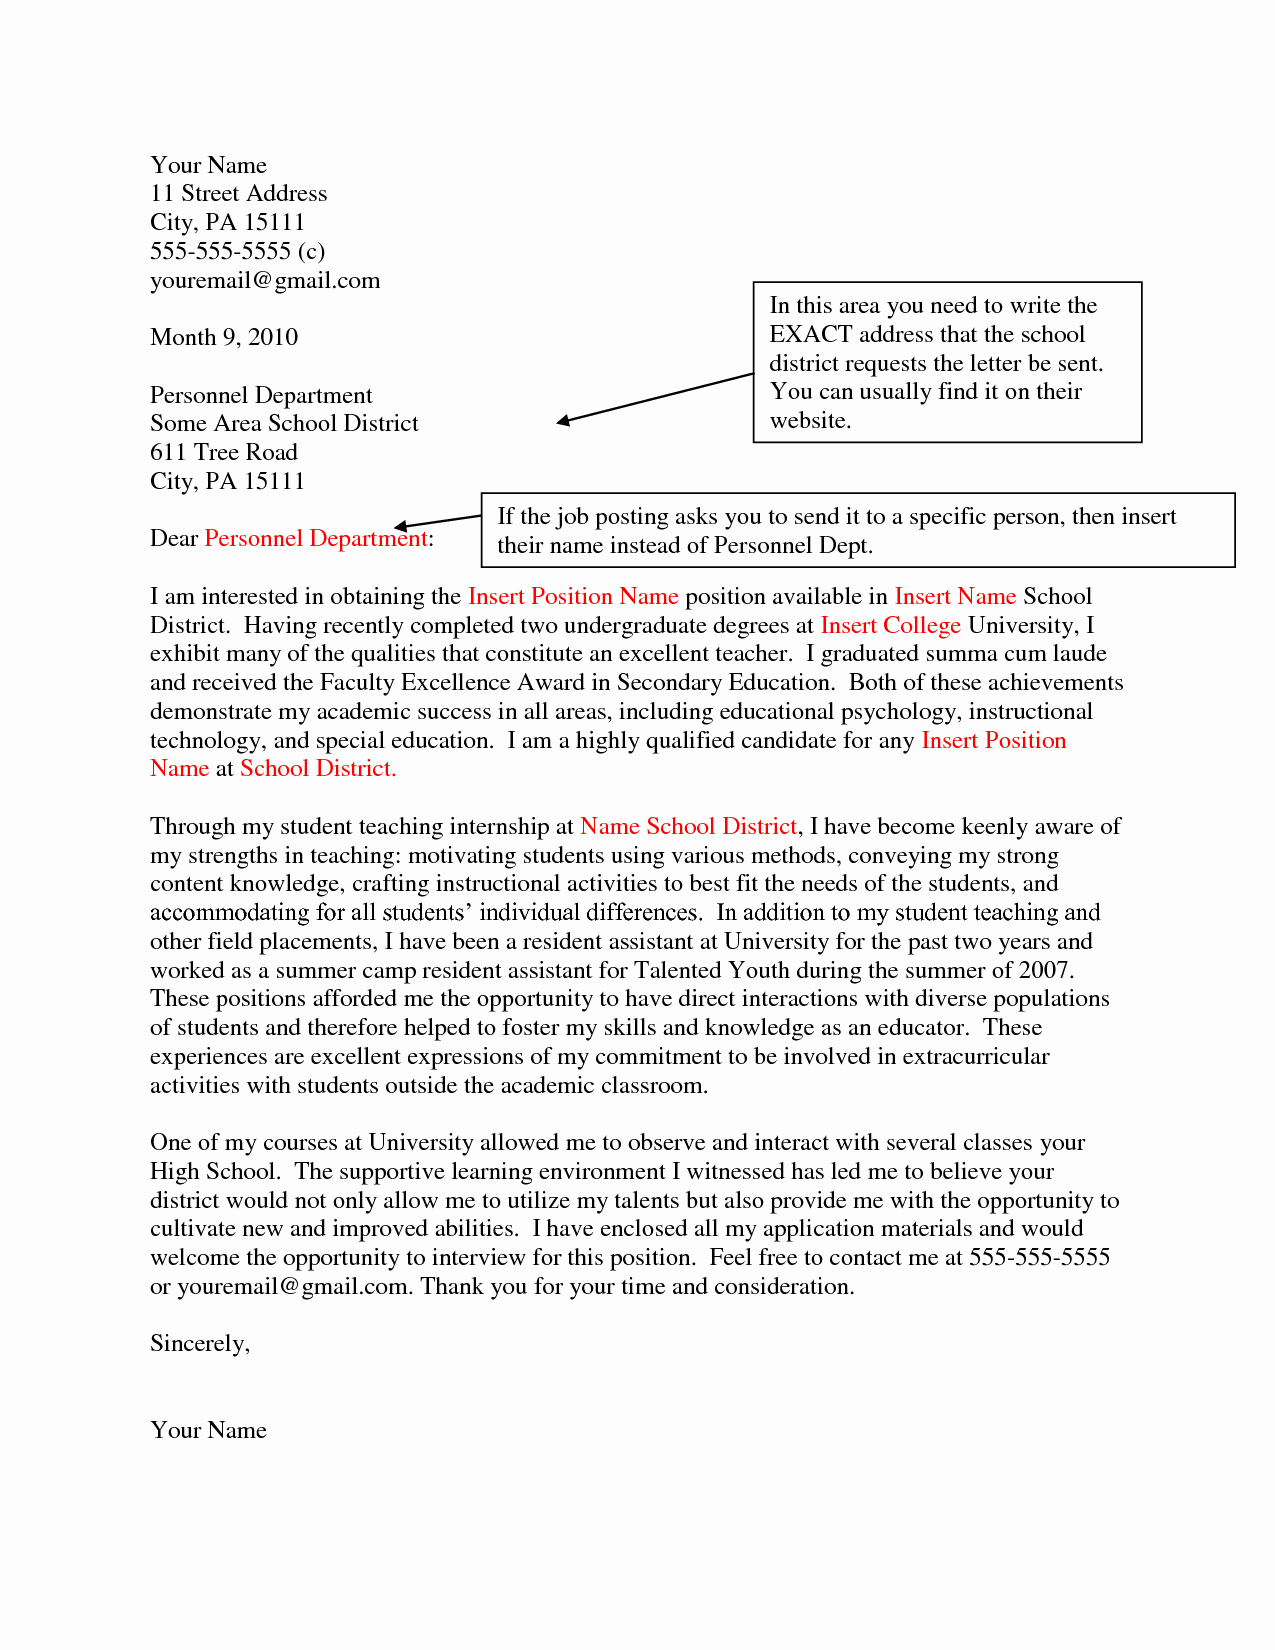 Example Of Letter Of Interest Beautiful How to Write A Cover Letter Of Interest Example for A Job